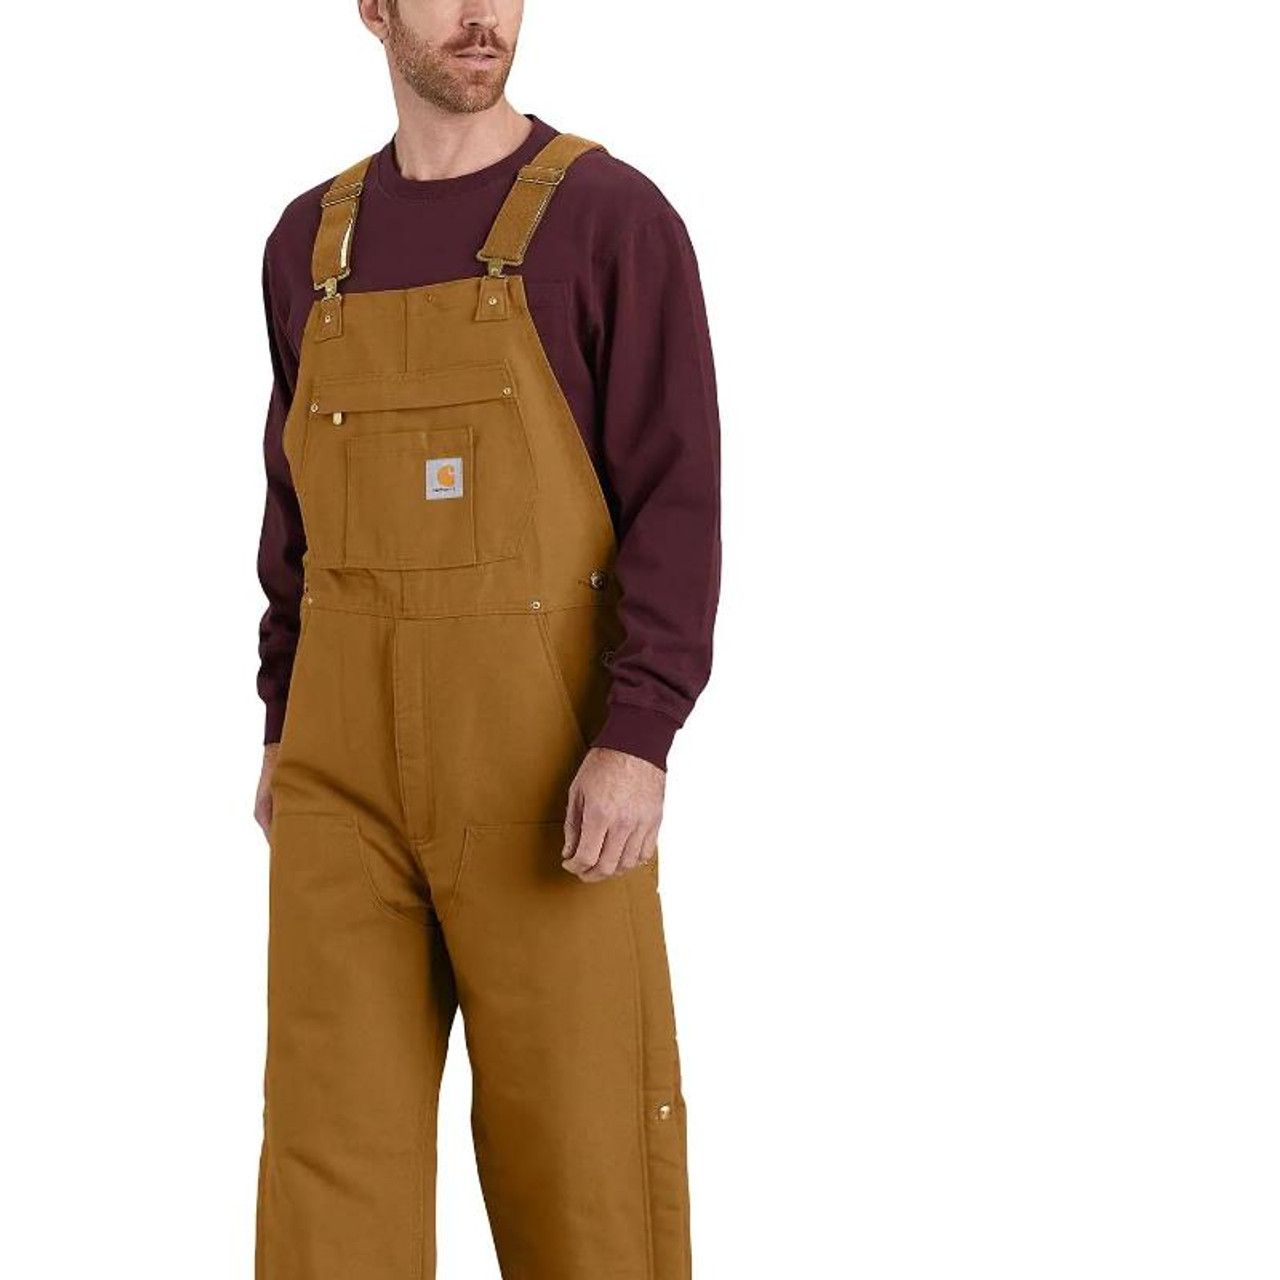 Carhartt Loose Fit Firm Duck Insulated Bib Overall - Presleys Outdoors